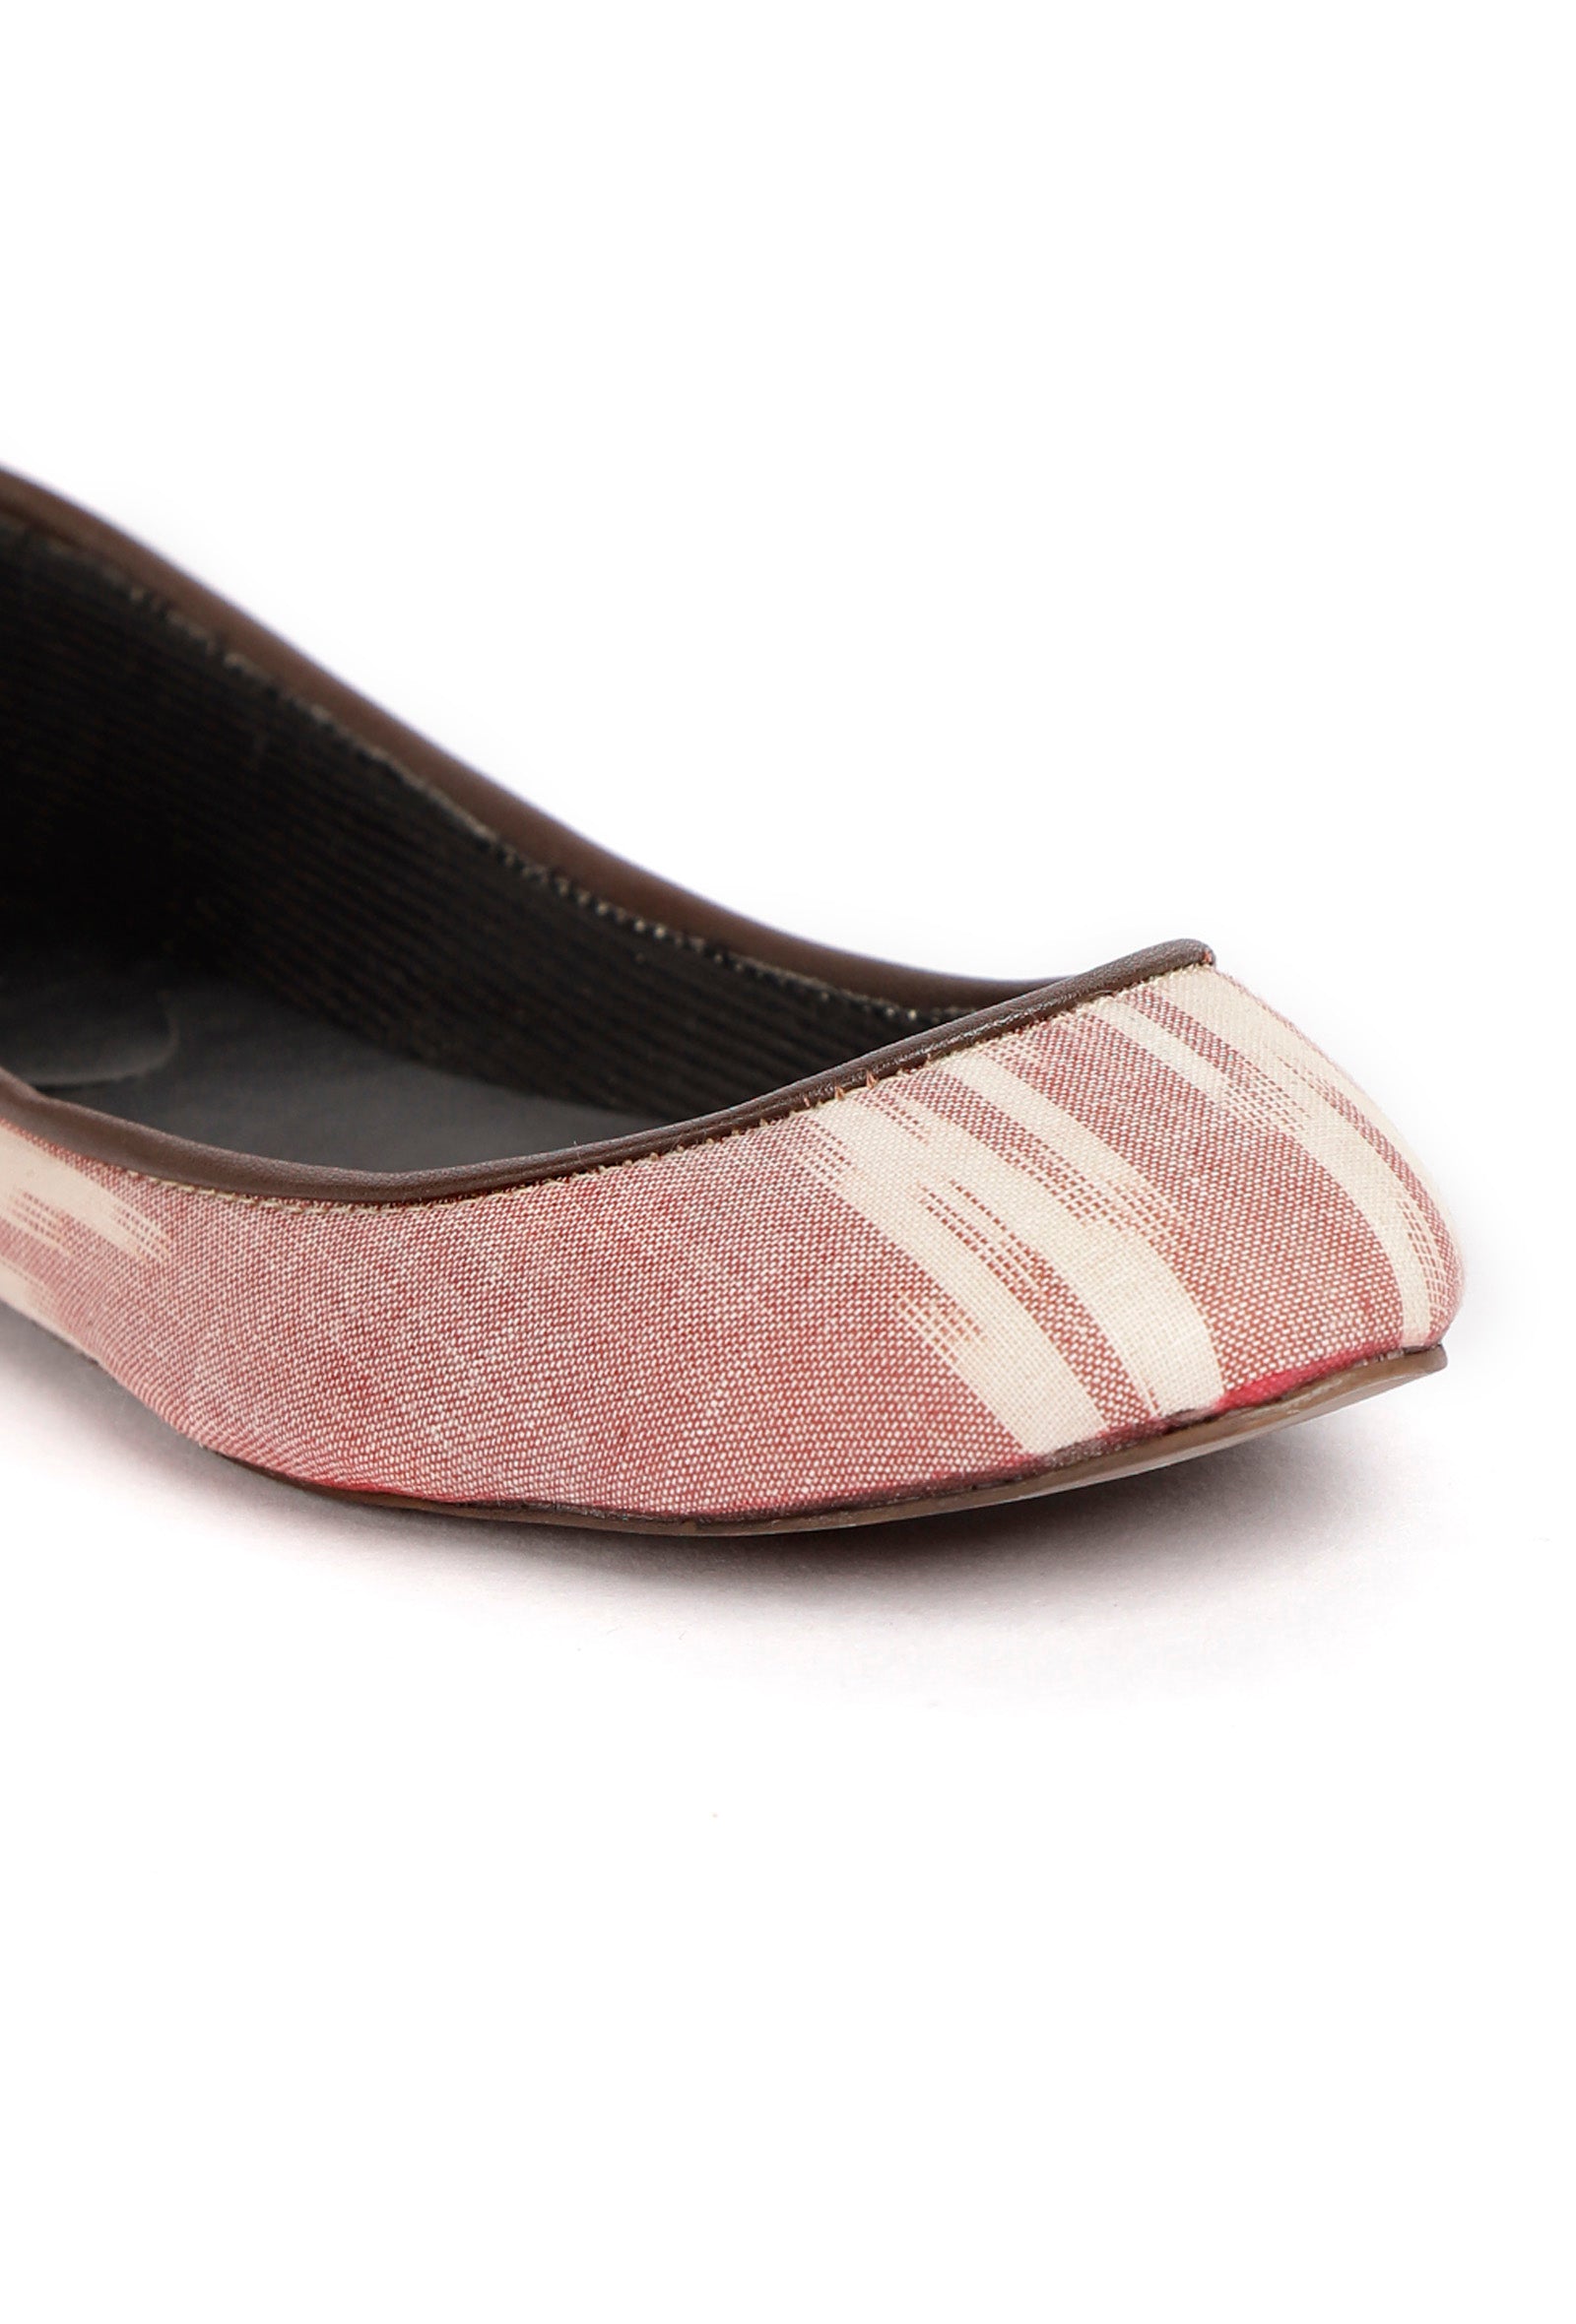 Pink and White Ikat Cruelty Free Leather Flat Ballerinas